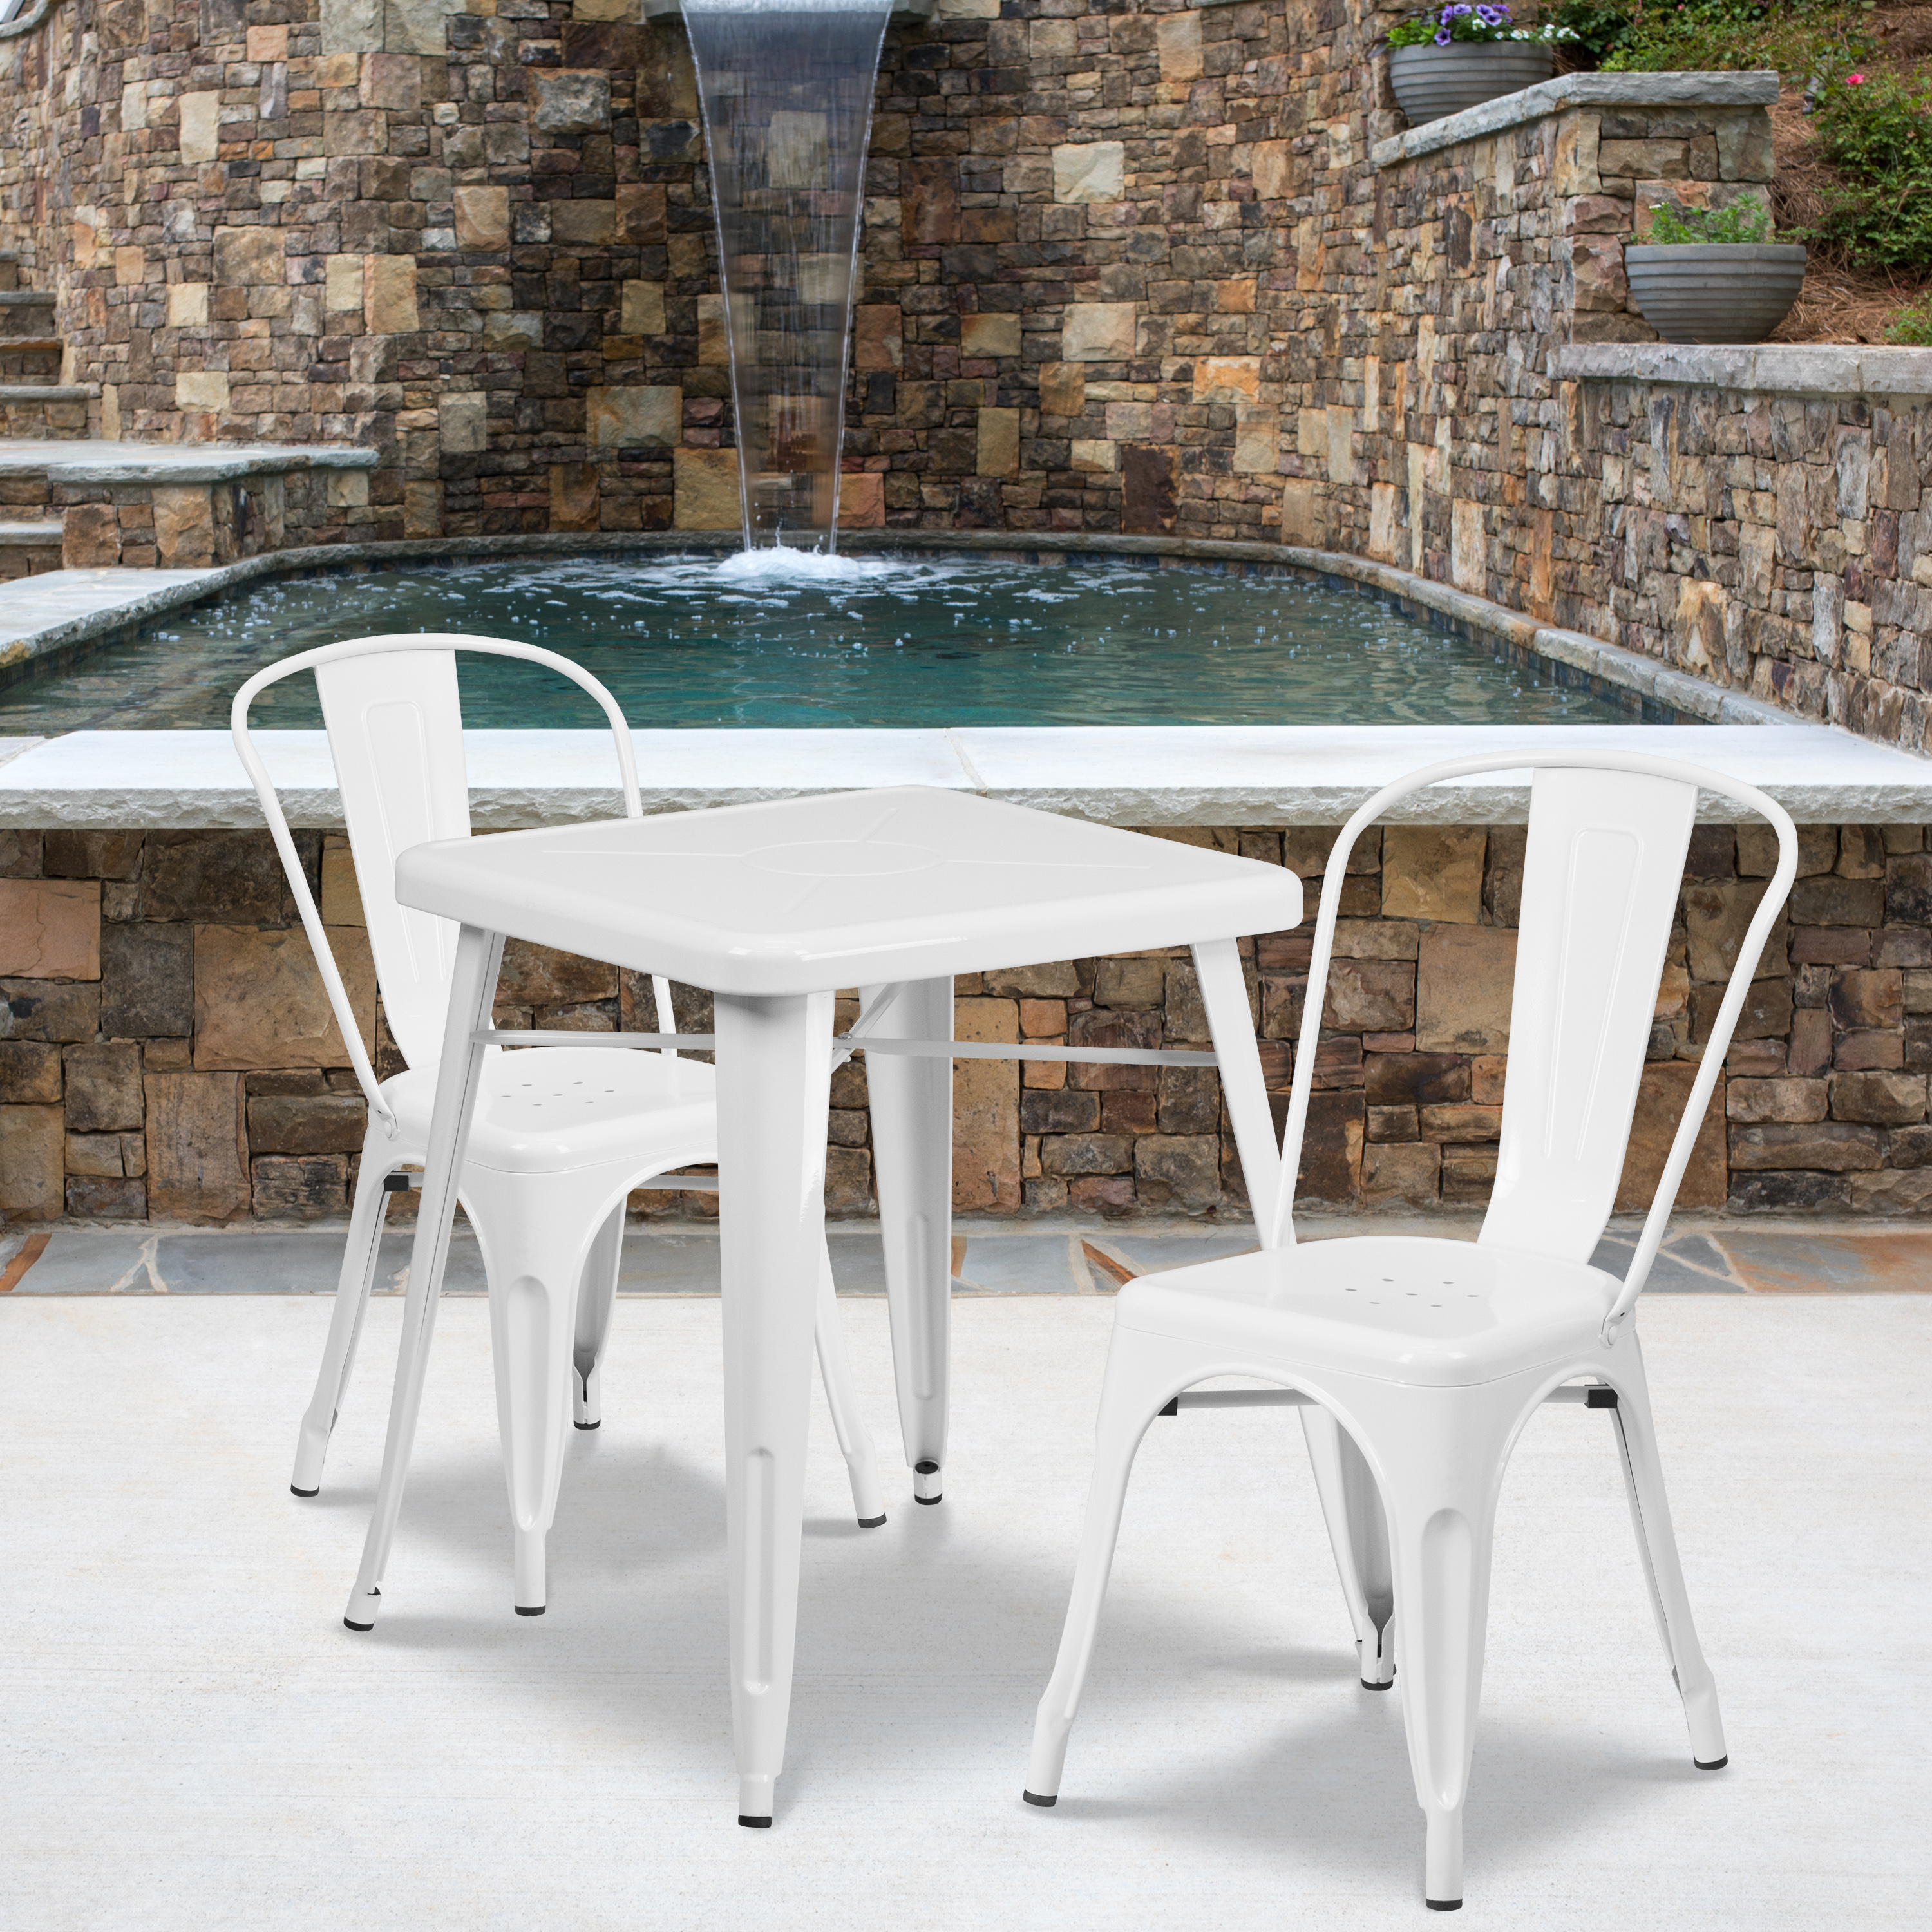 Flash Furniture Commercial Grade 23.75" Square White Metal Indoor-Outdoor Table Set with 2 Stack Chairs - image 1 of 5